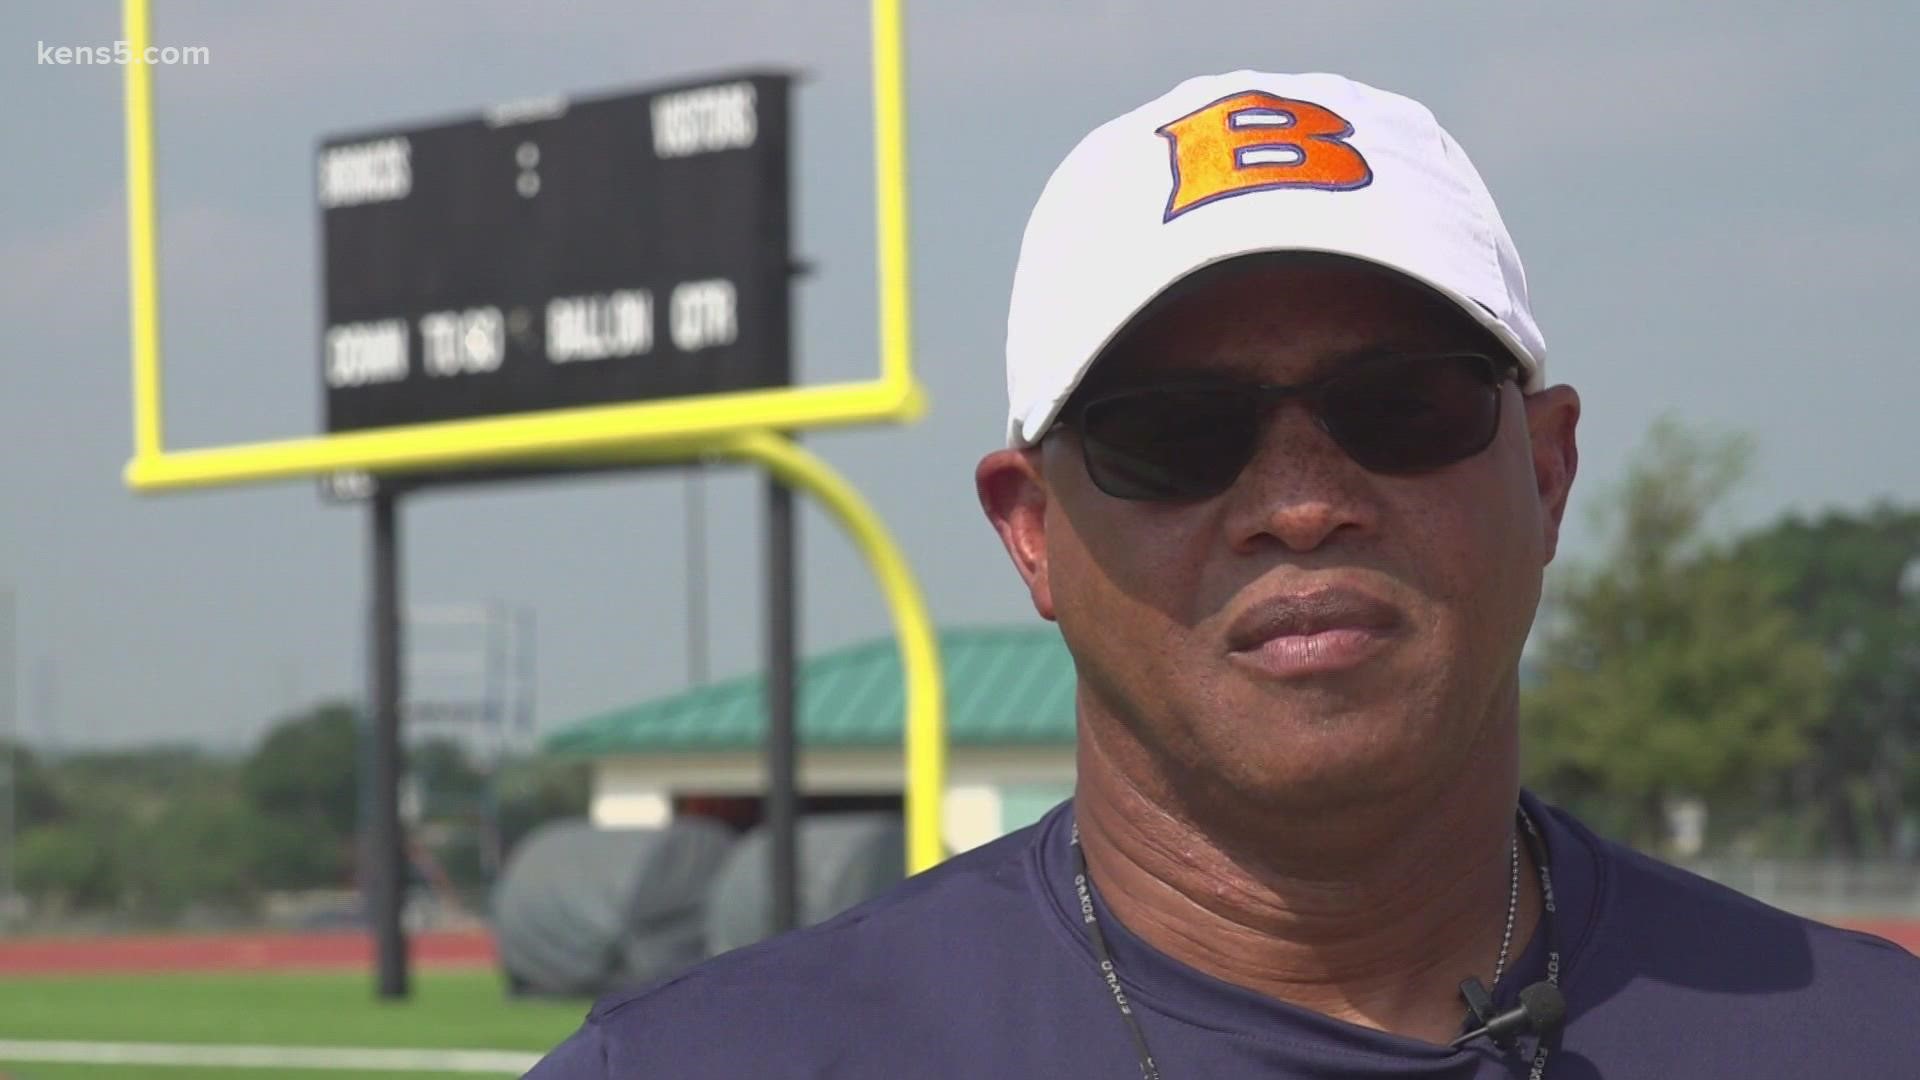 The Brandeis Broncos have a new head coach for the 2021 season, and the program is already seeing improvement.